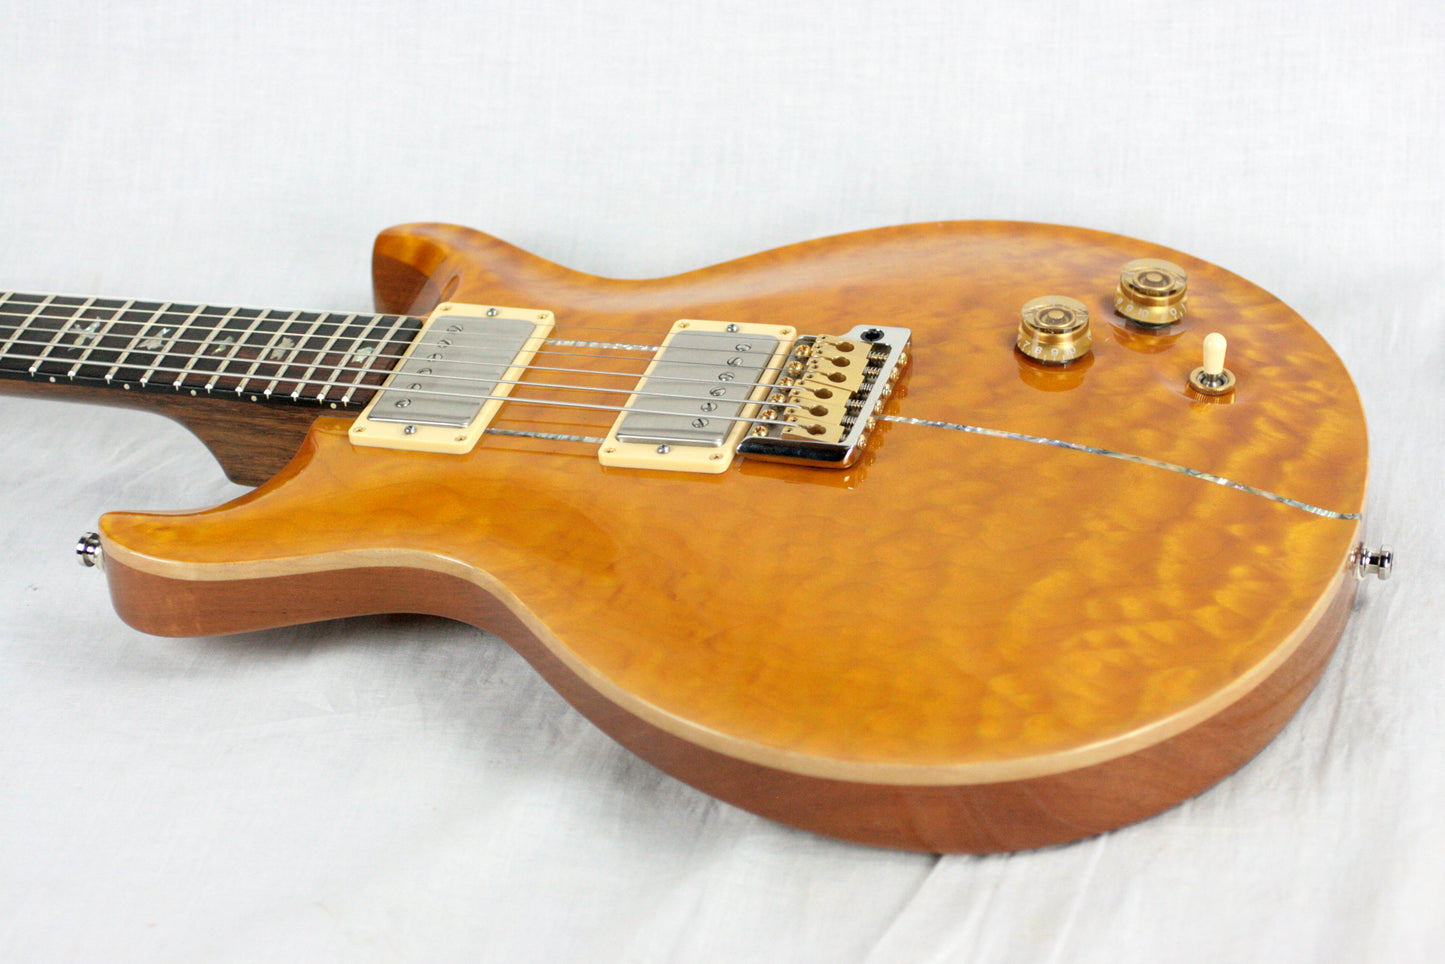 2004 PRS Solid BRAZILIAN ROSEWOOD Neck Santana Limited Edition 1/200! Paul Reed Smith Yellow Quilt